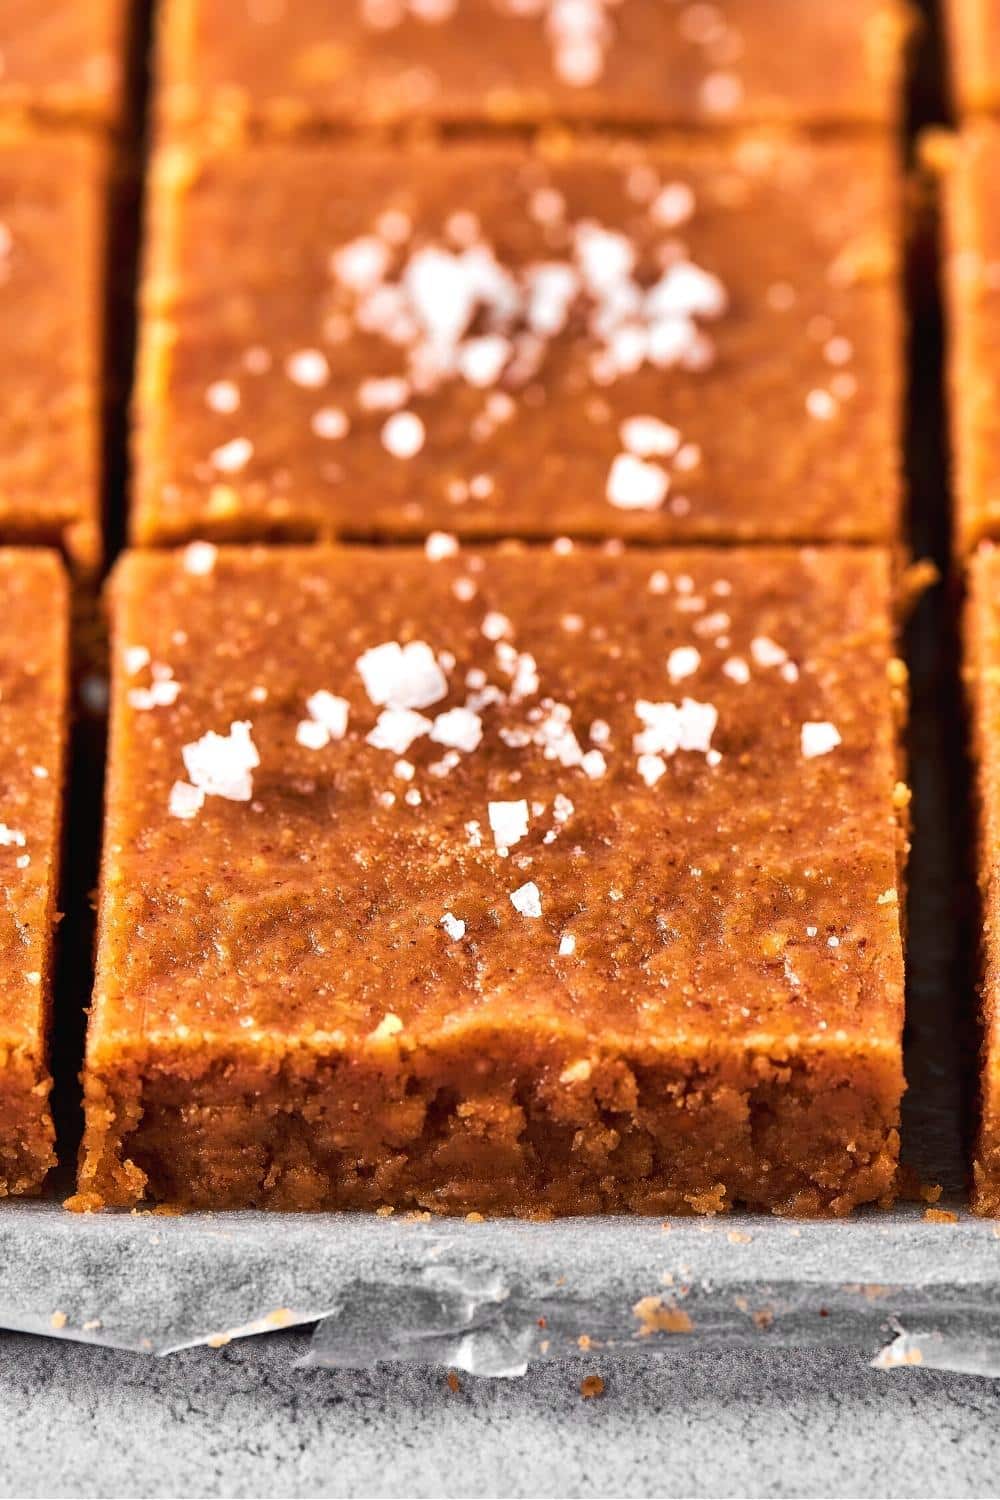 A square of peanut butter fudge with some sea salt on top with another square behind it.